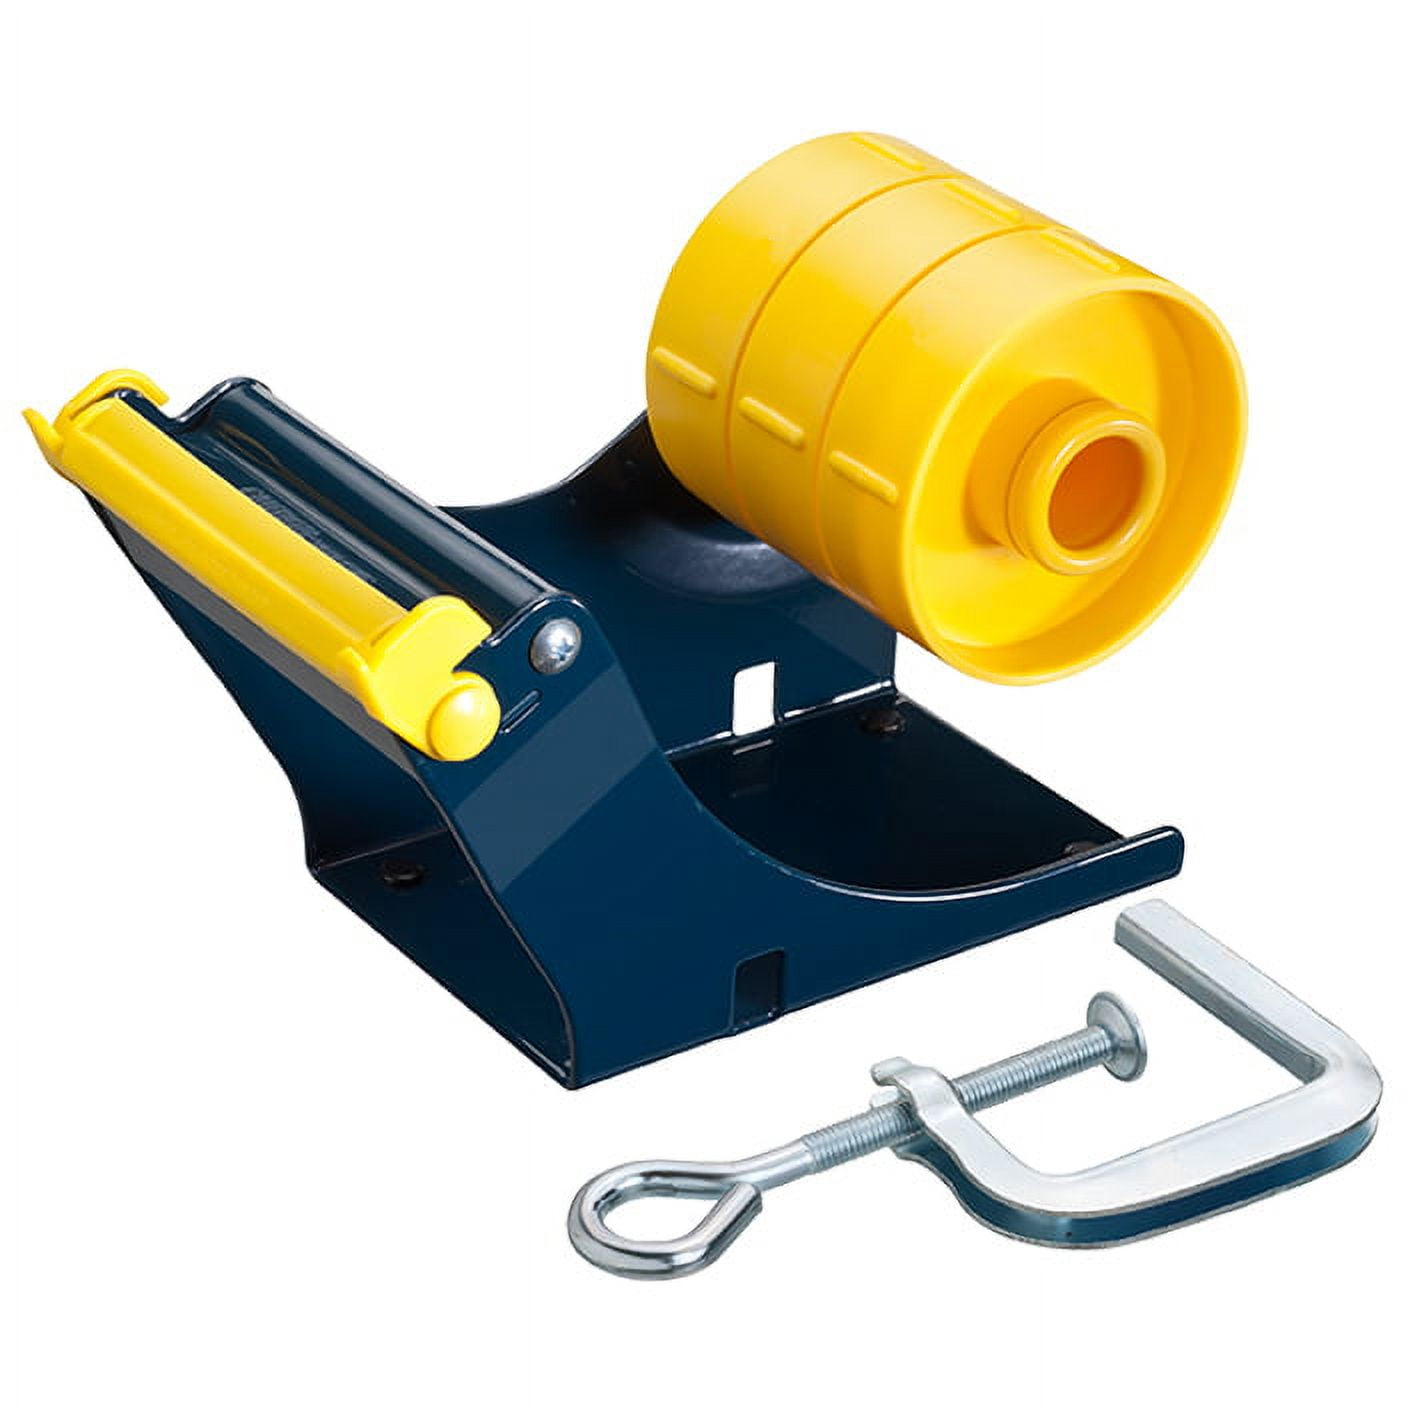 One-hand Operation Masking Tape Dispenser By Excell ET-168 